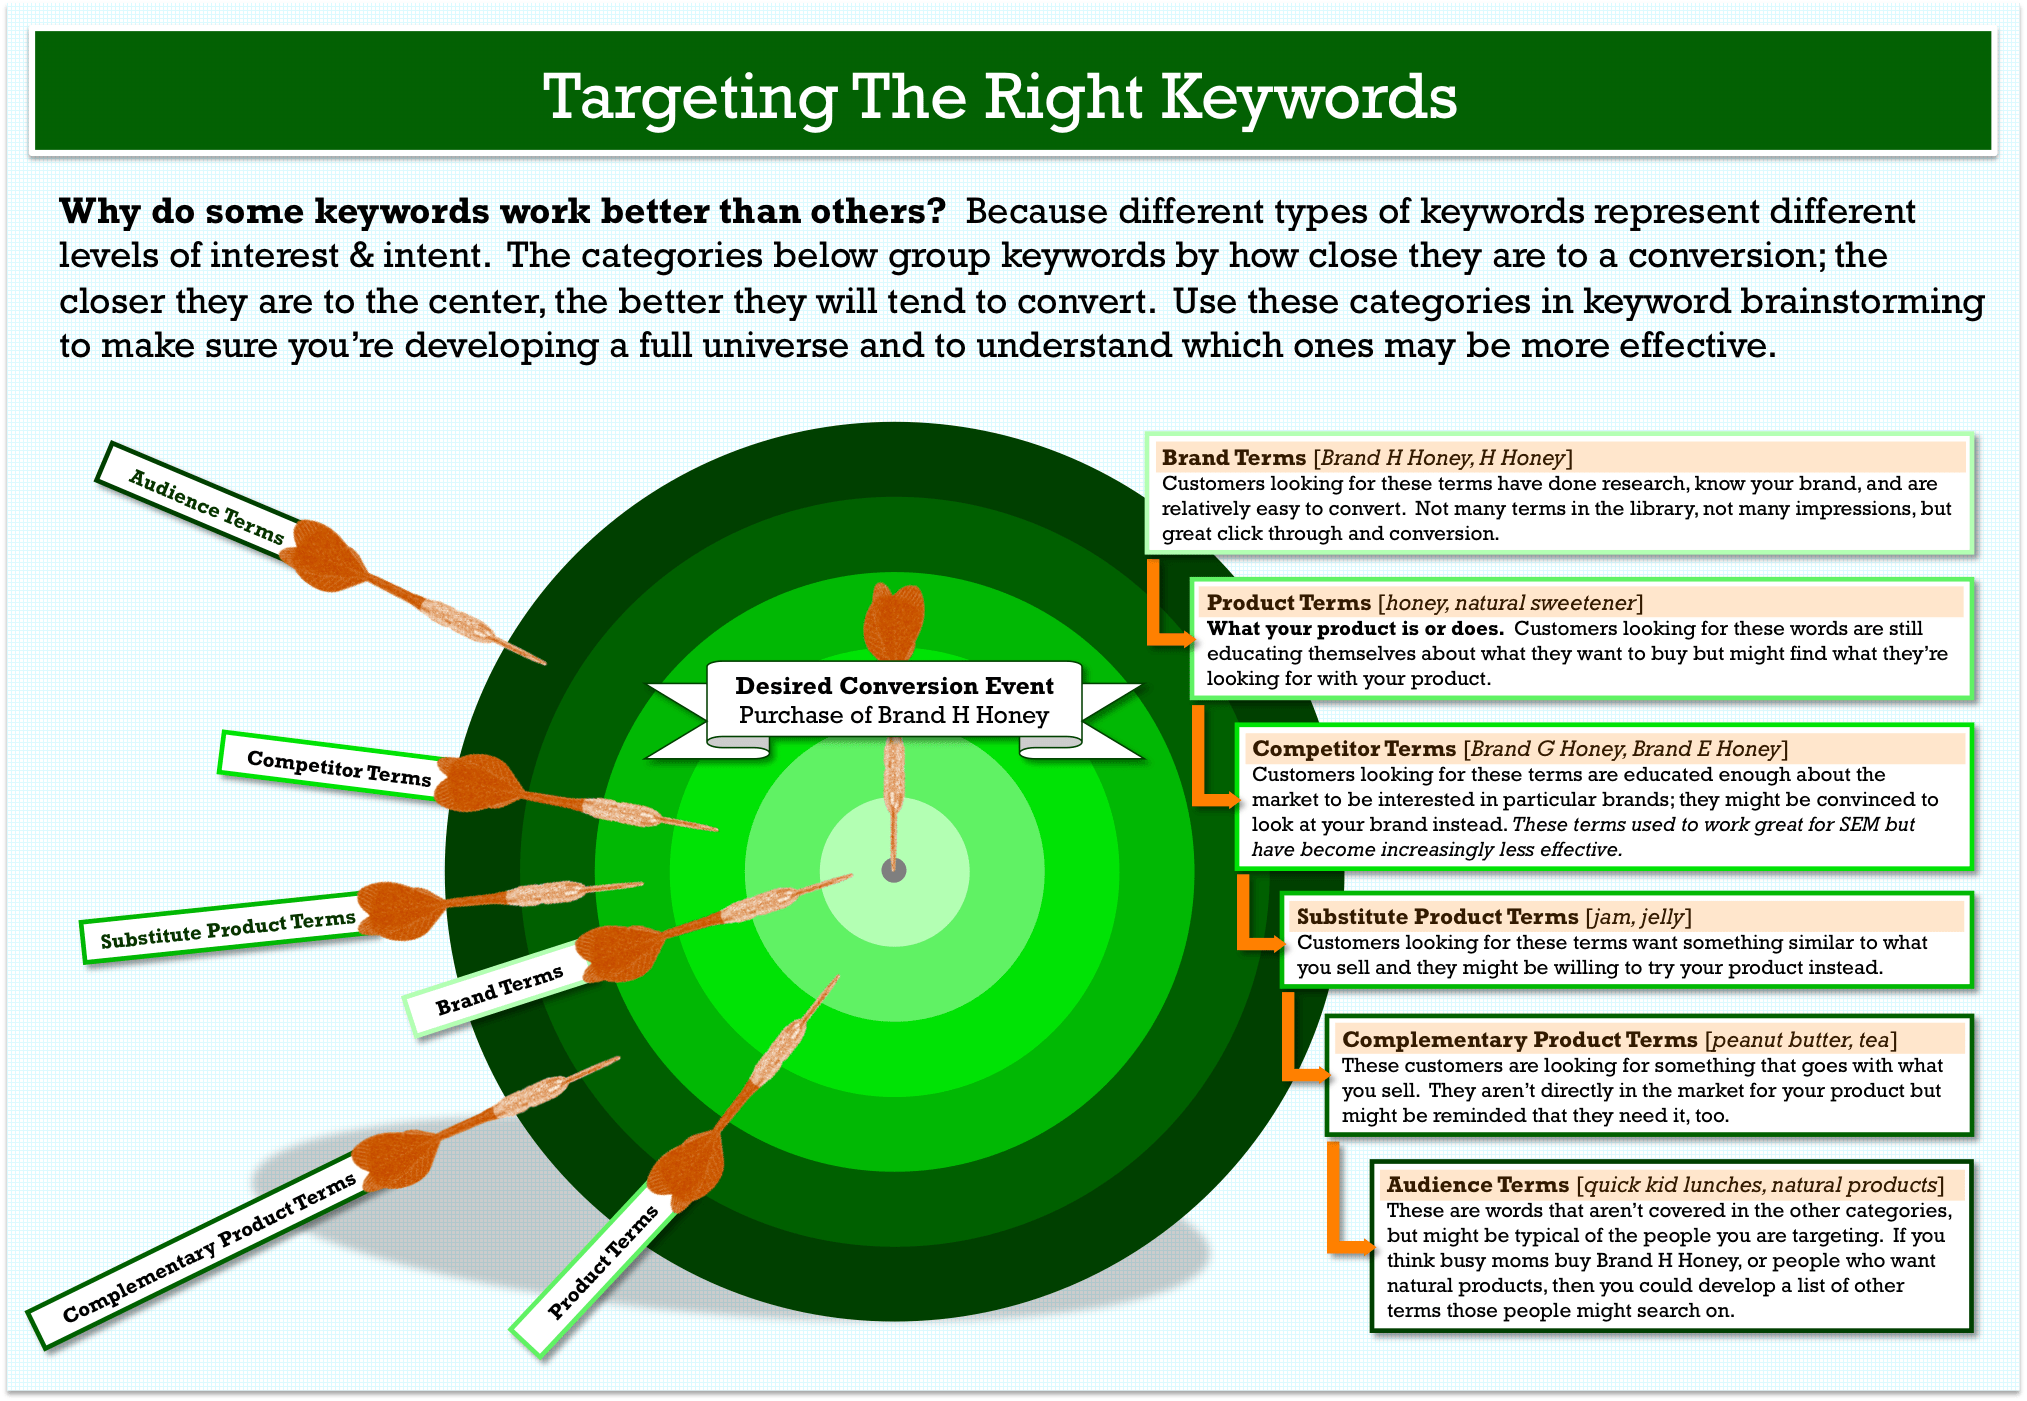 V Digital Services - How to Get More Website Traffic Without Paid Media: Targeting the Right Keywords Infographic